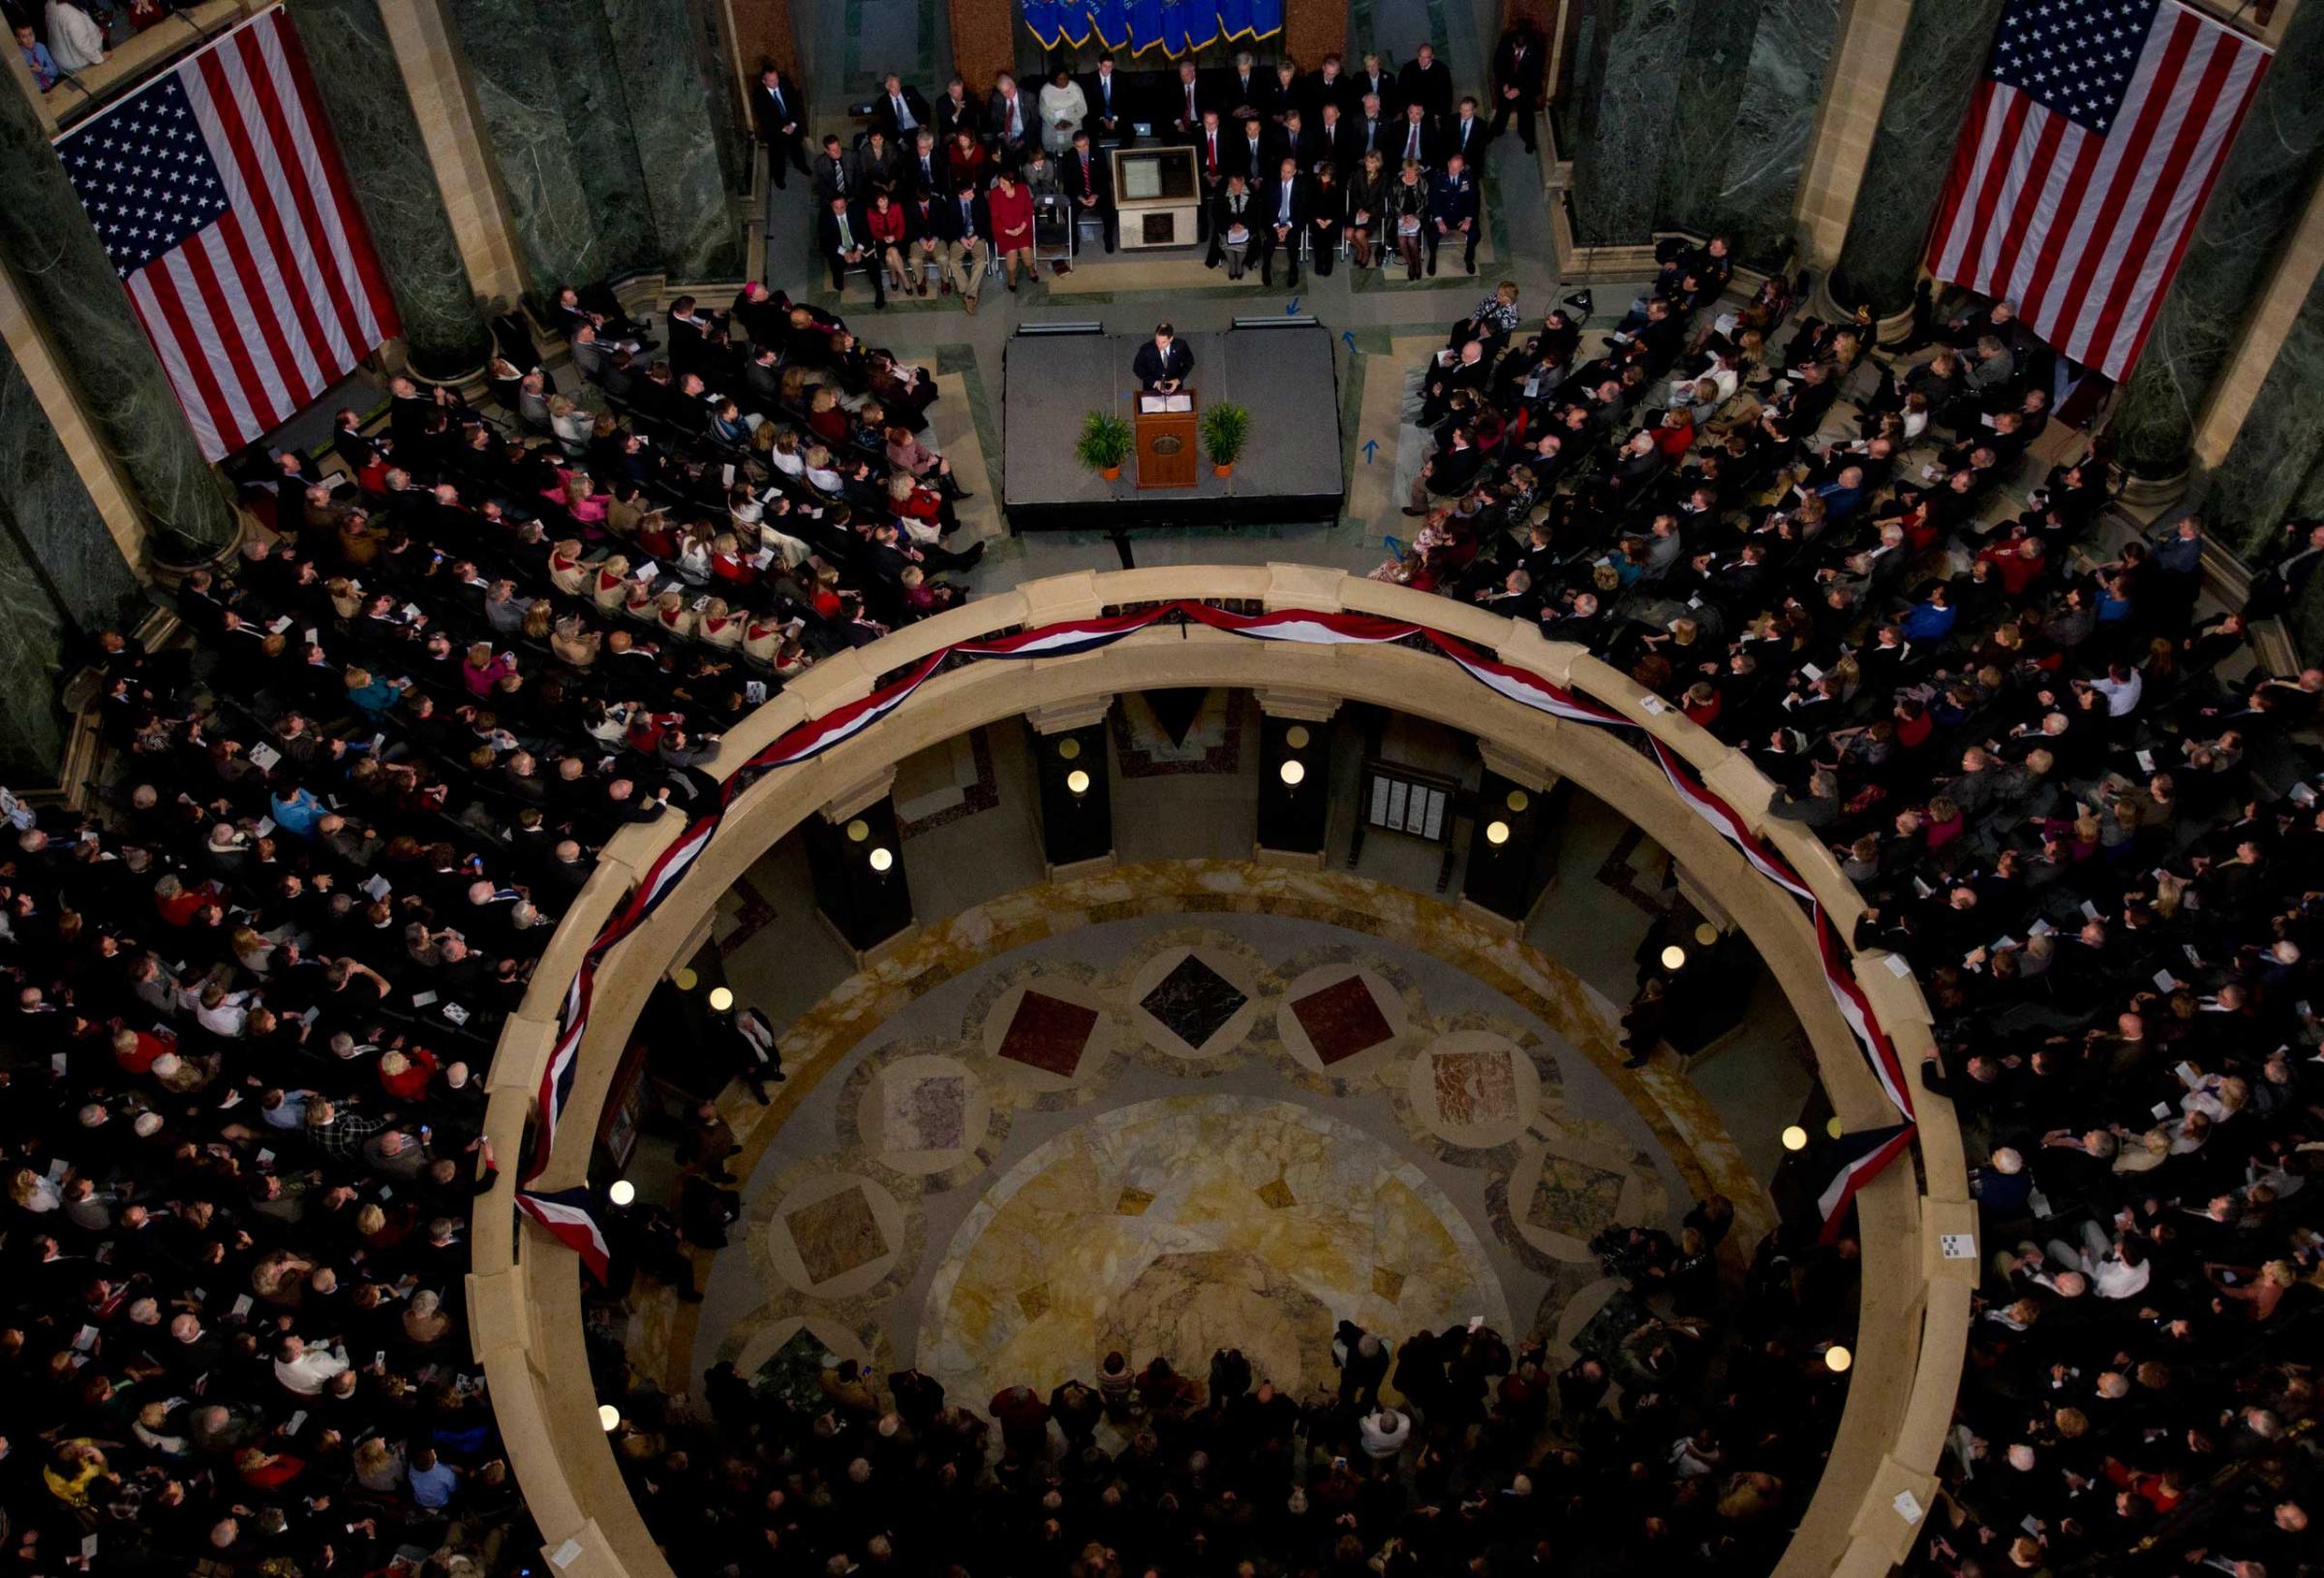 Wisconsin Gov. Scott Walker speaks at an inauguration ceremony in the rotunda of the state Capitol Monday in Madison, Wis., on Jan. 3, 2011.